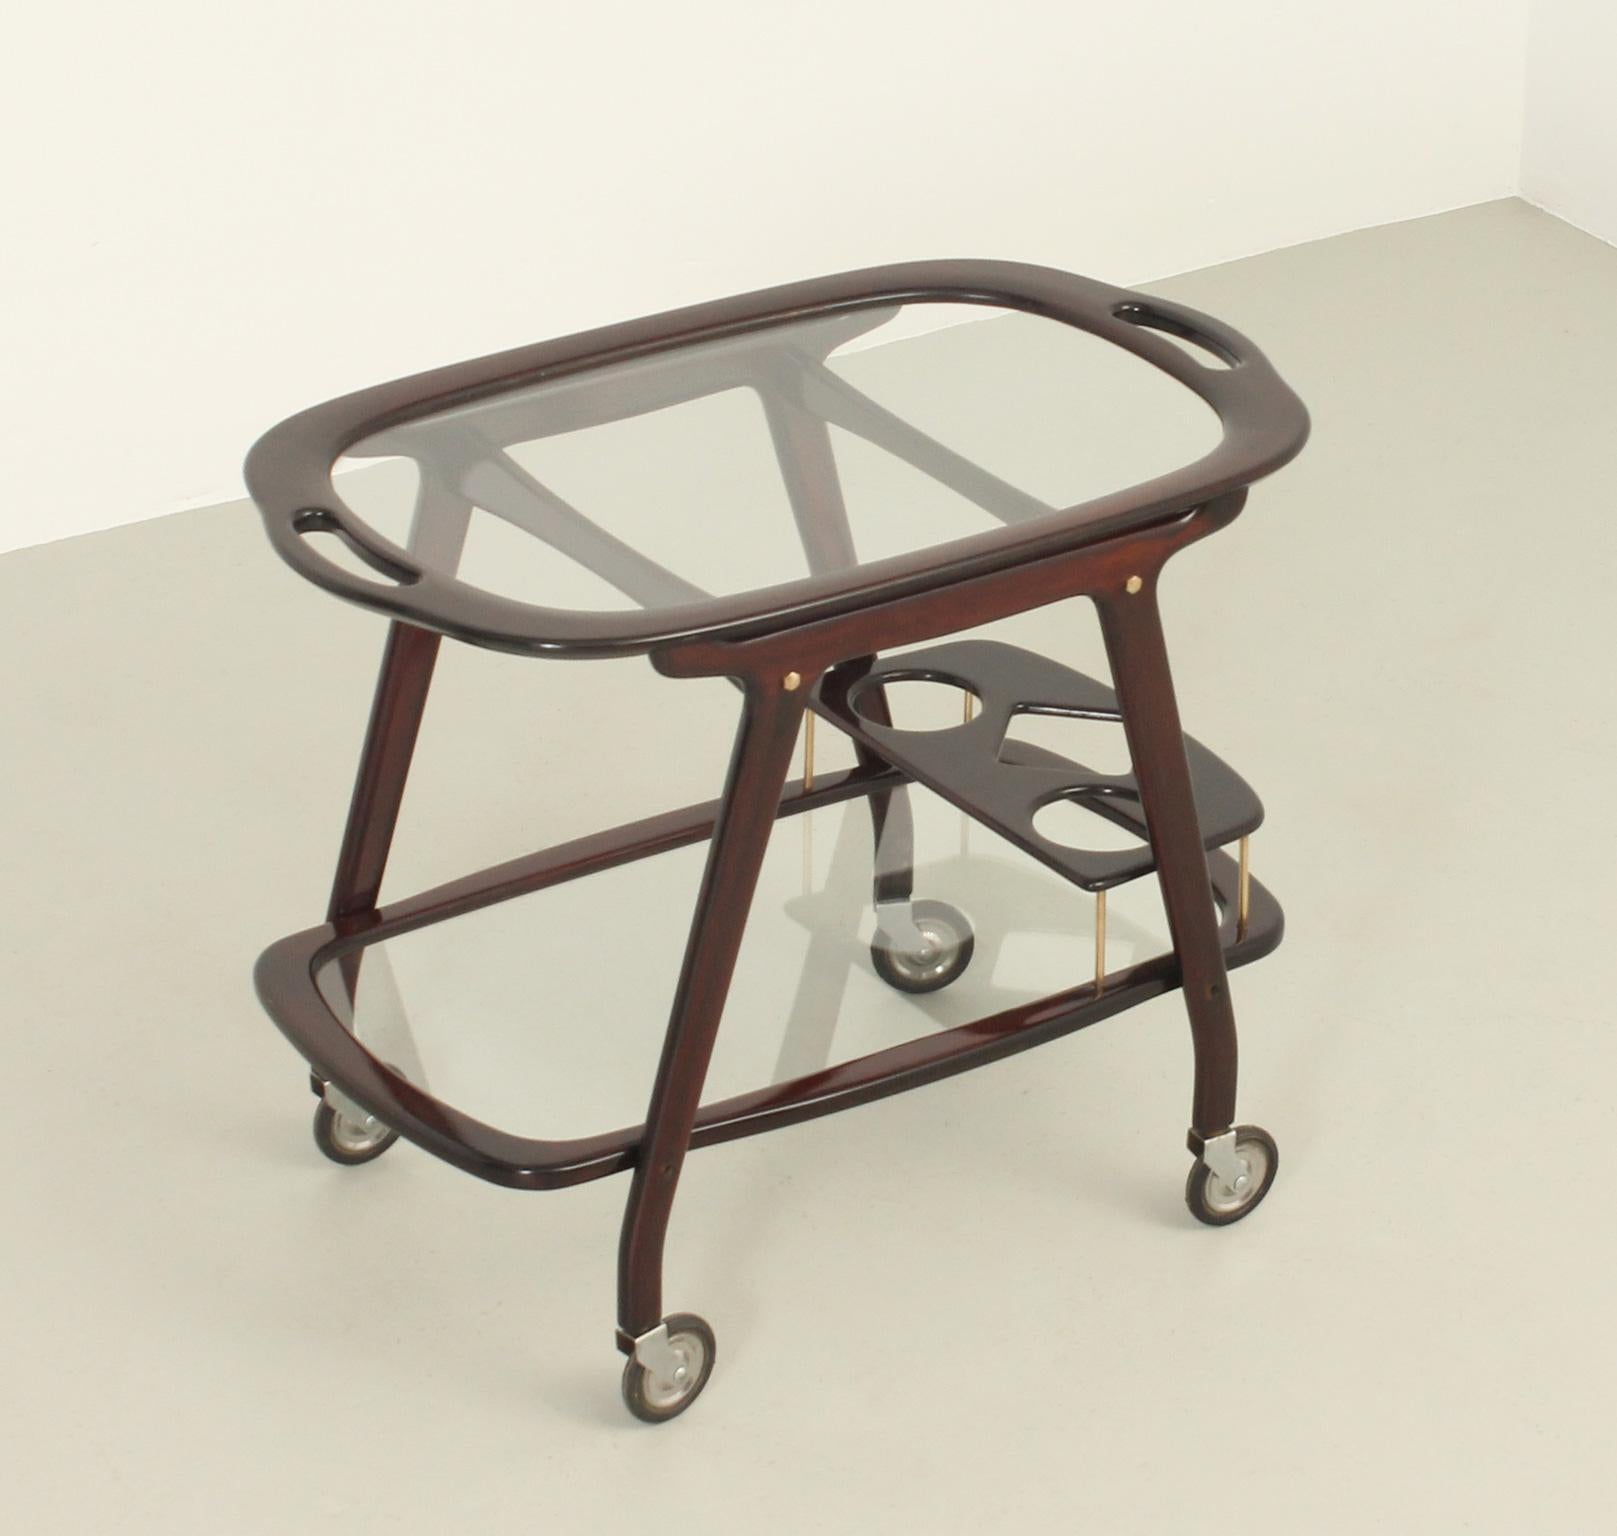 Serving bar cart designed in 1950's by Cesare Lacca, Italy. Hardwood, clear glass and brass details. Movable serving tray on top and lower shelf with bottle compartment.